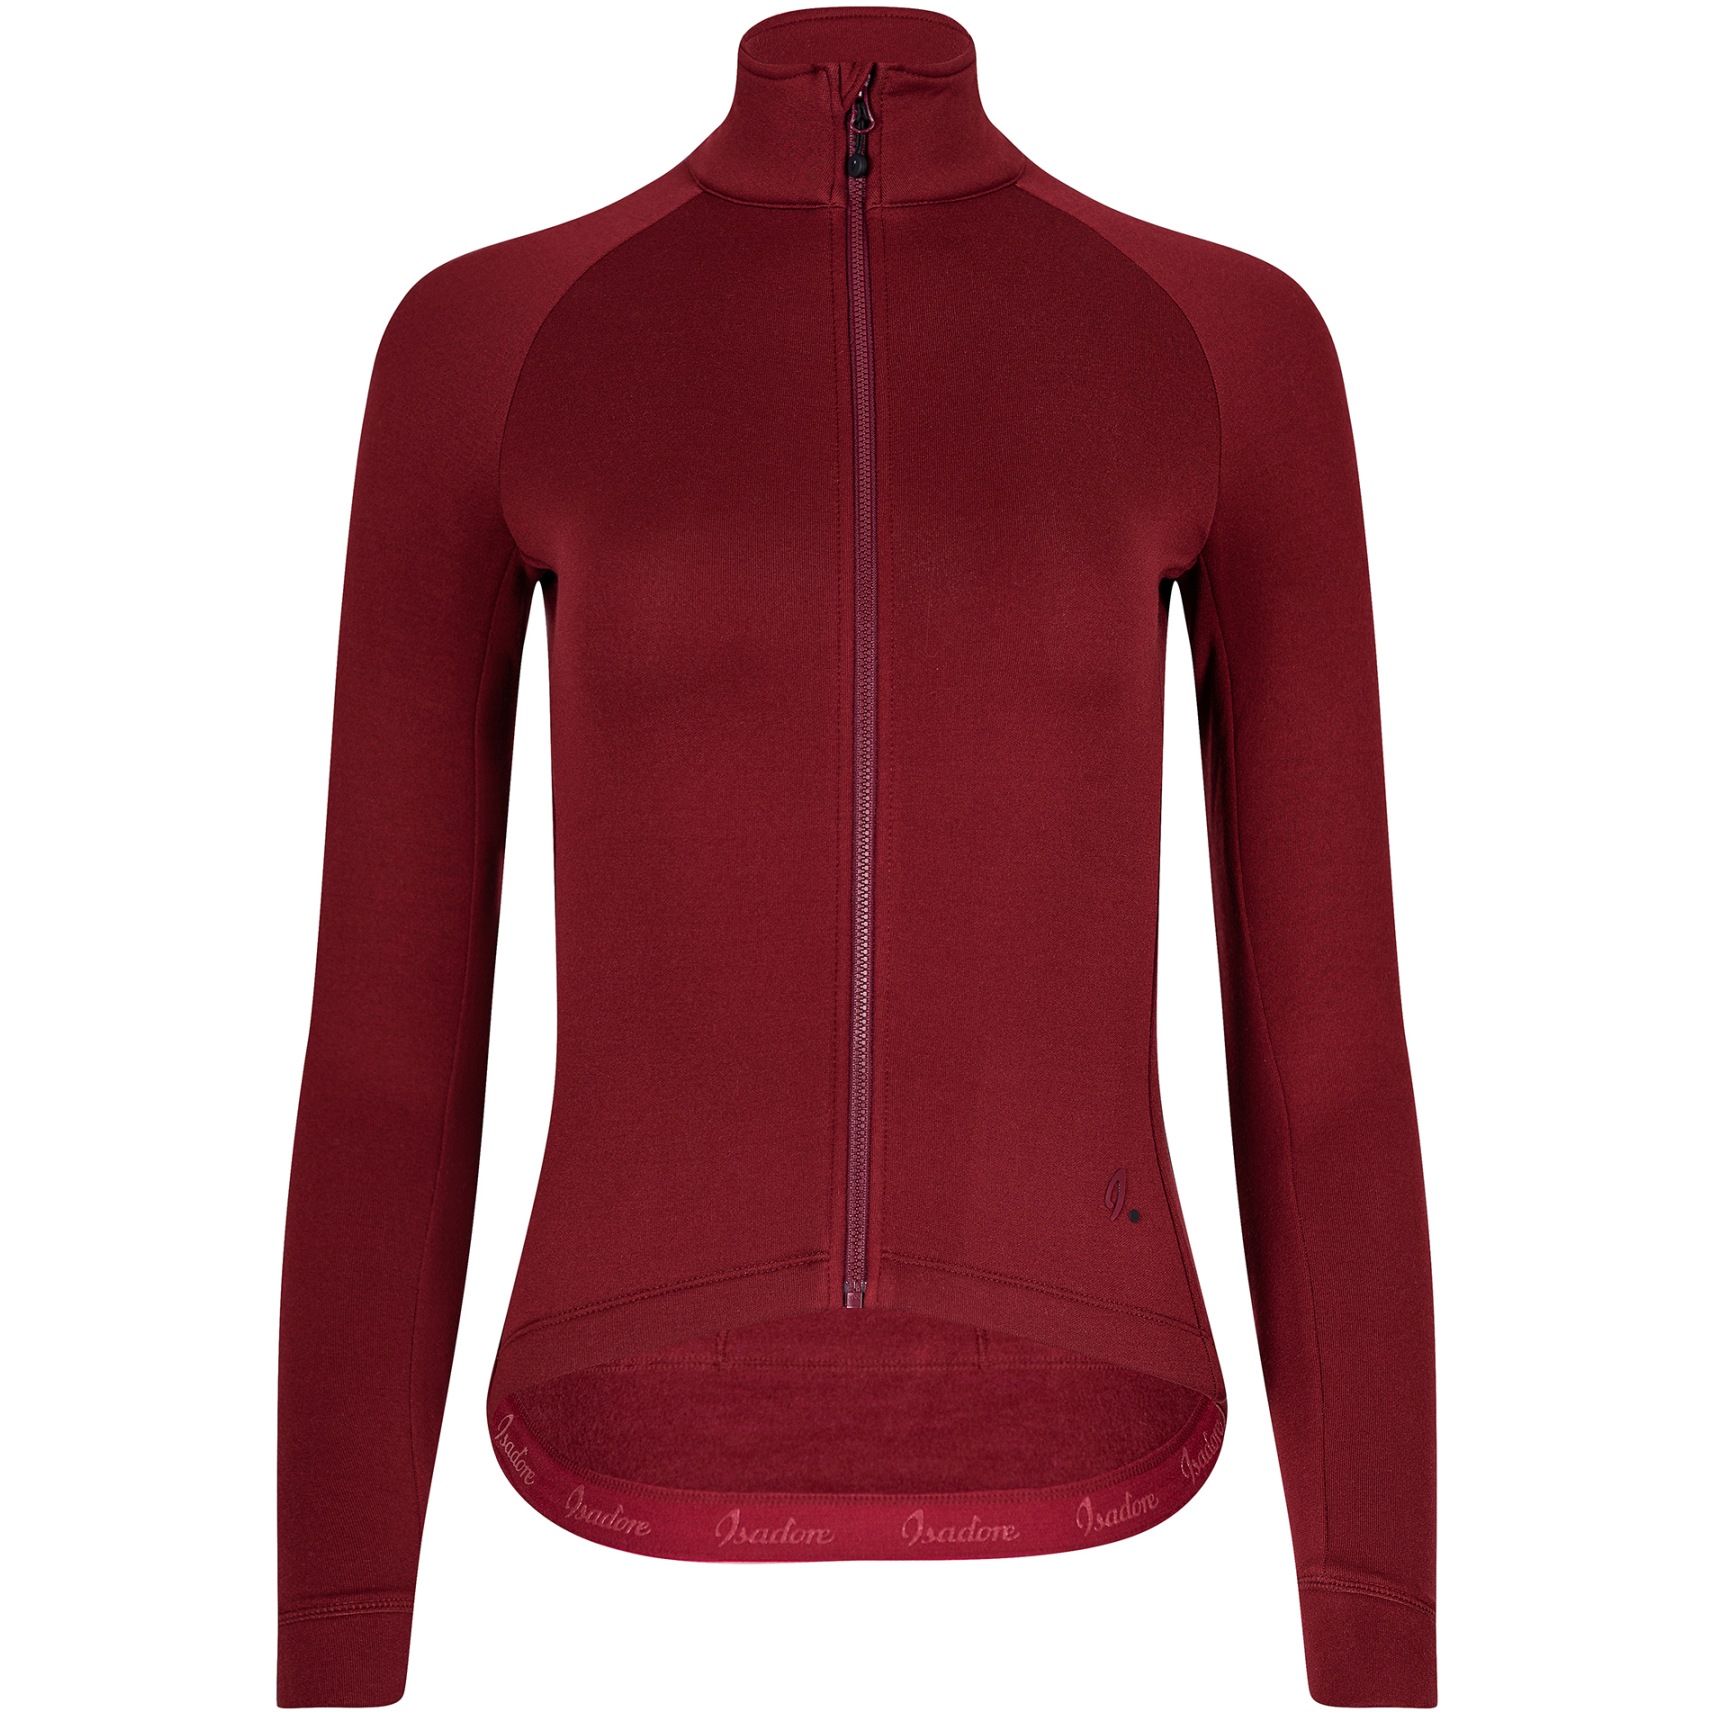 Image of Isadore Women's TherMerino Jersey - Cabernet